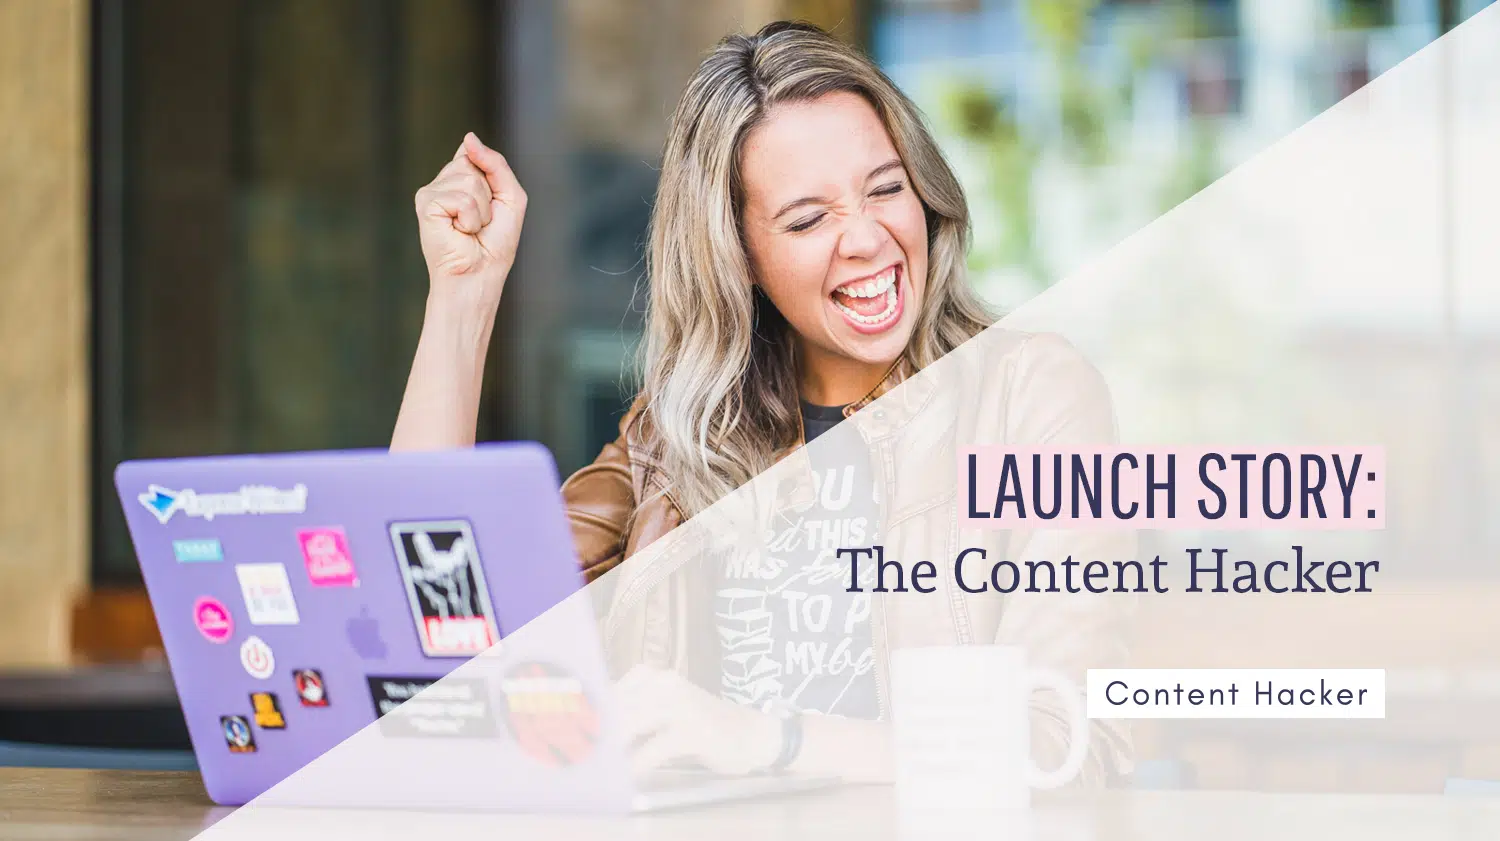 launch story of the content hacker